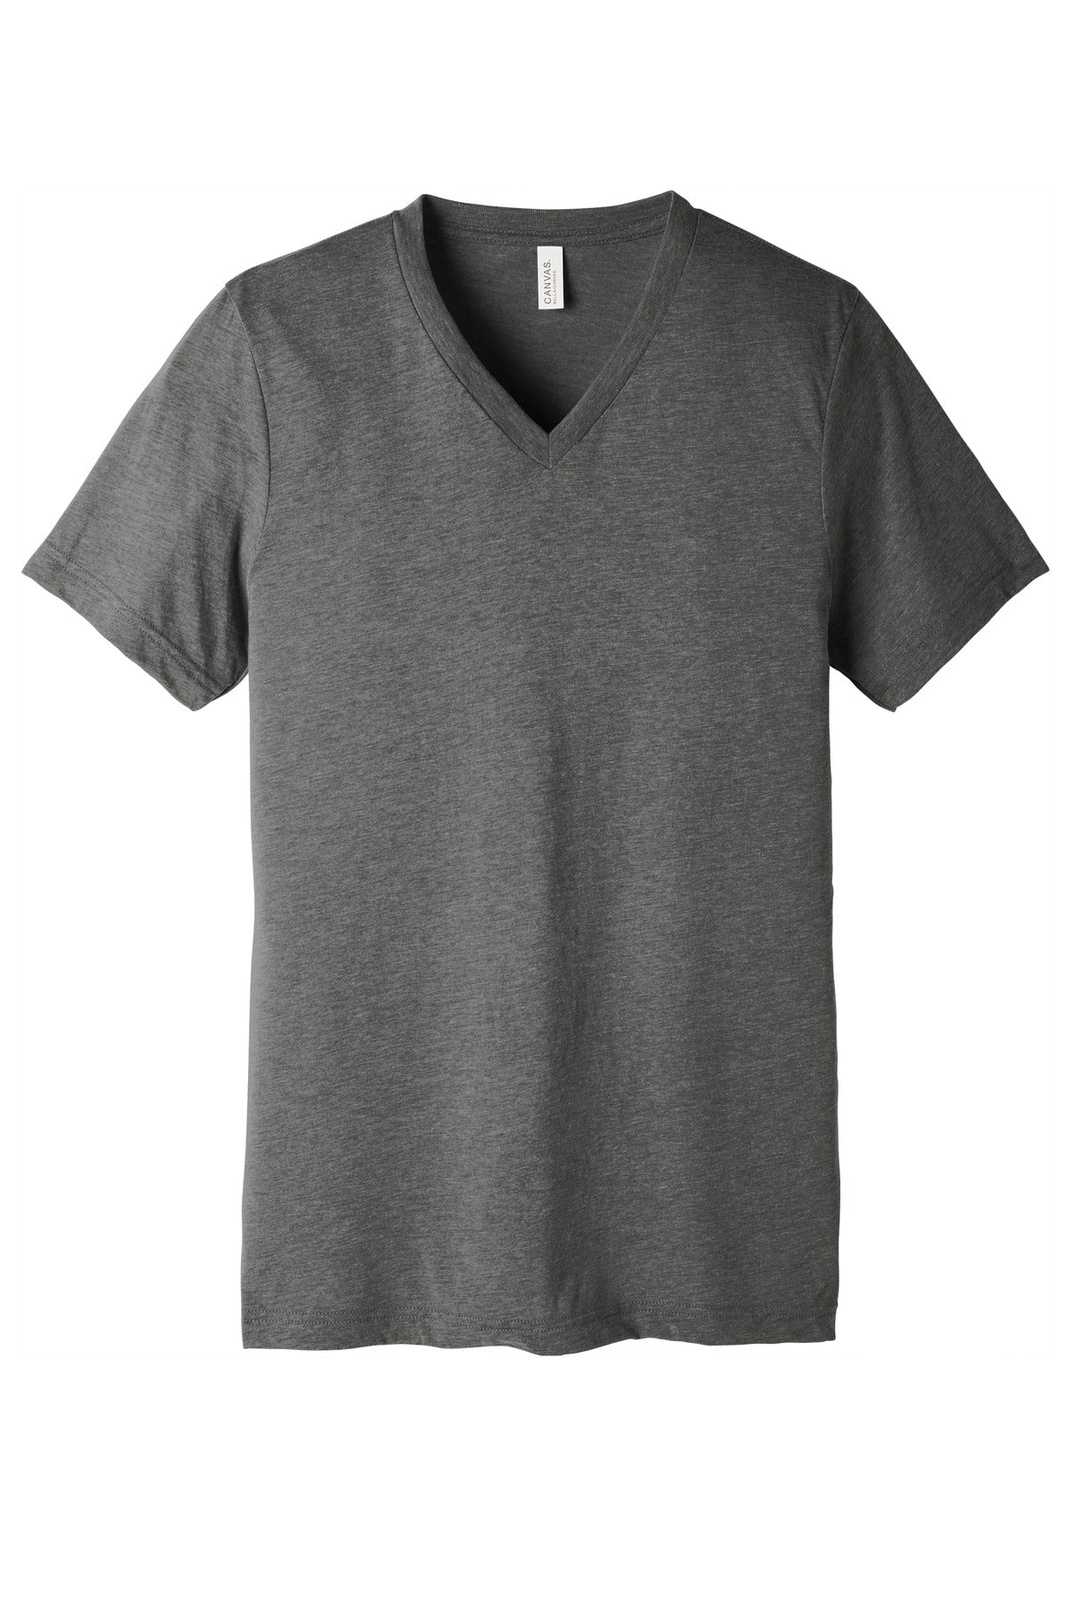 Bella + Canvas 3415 Unisex Triblend Short Sleeve V-Neck Tee - Athletic Gray Triblend - HIT a Double